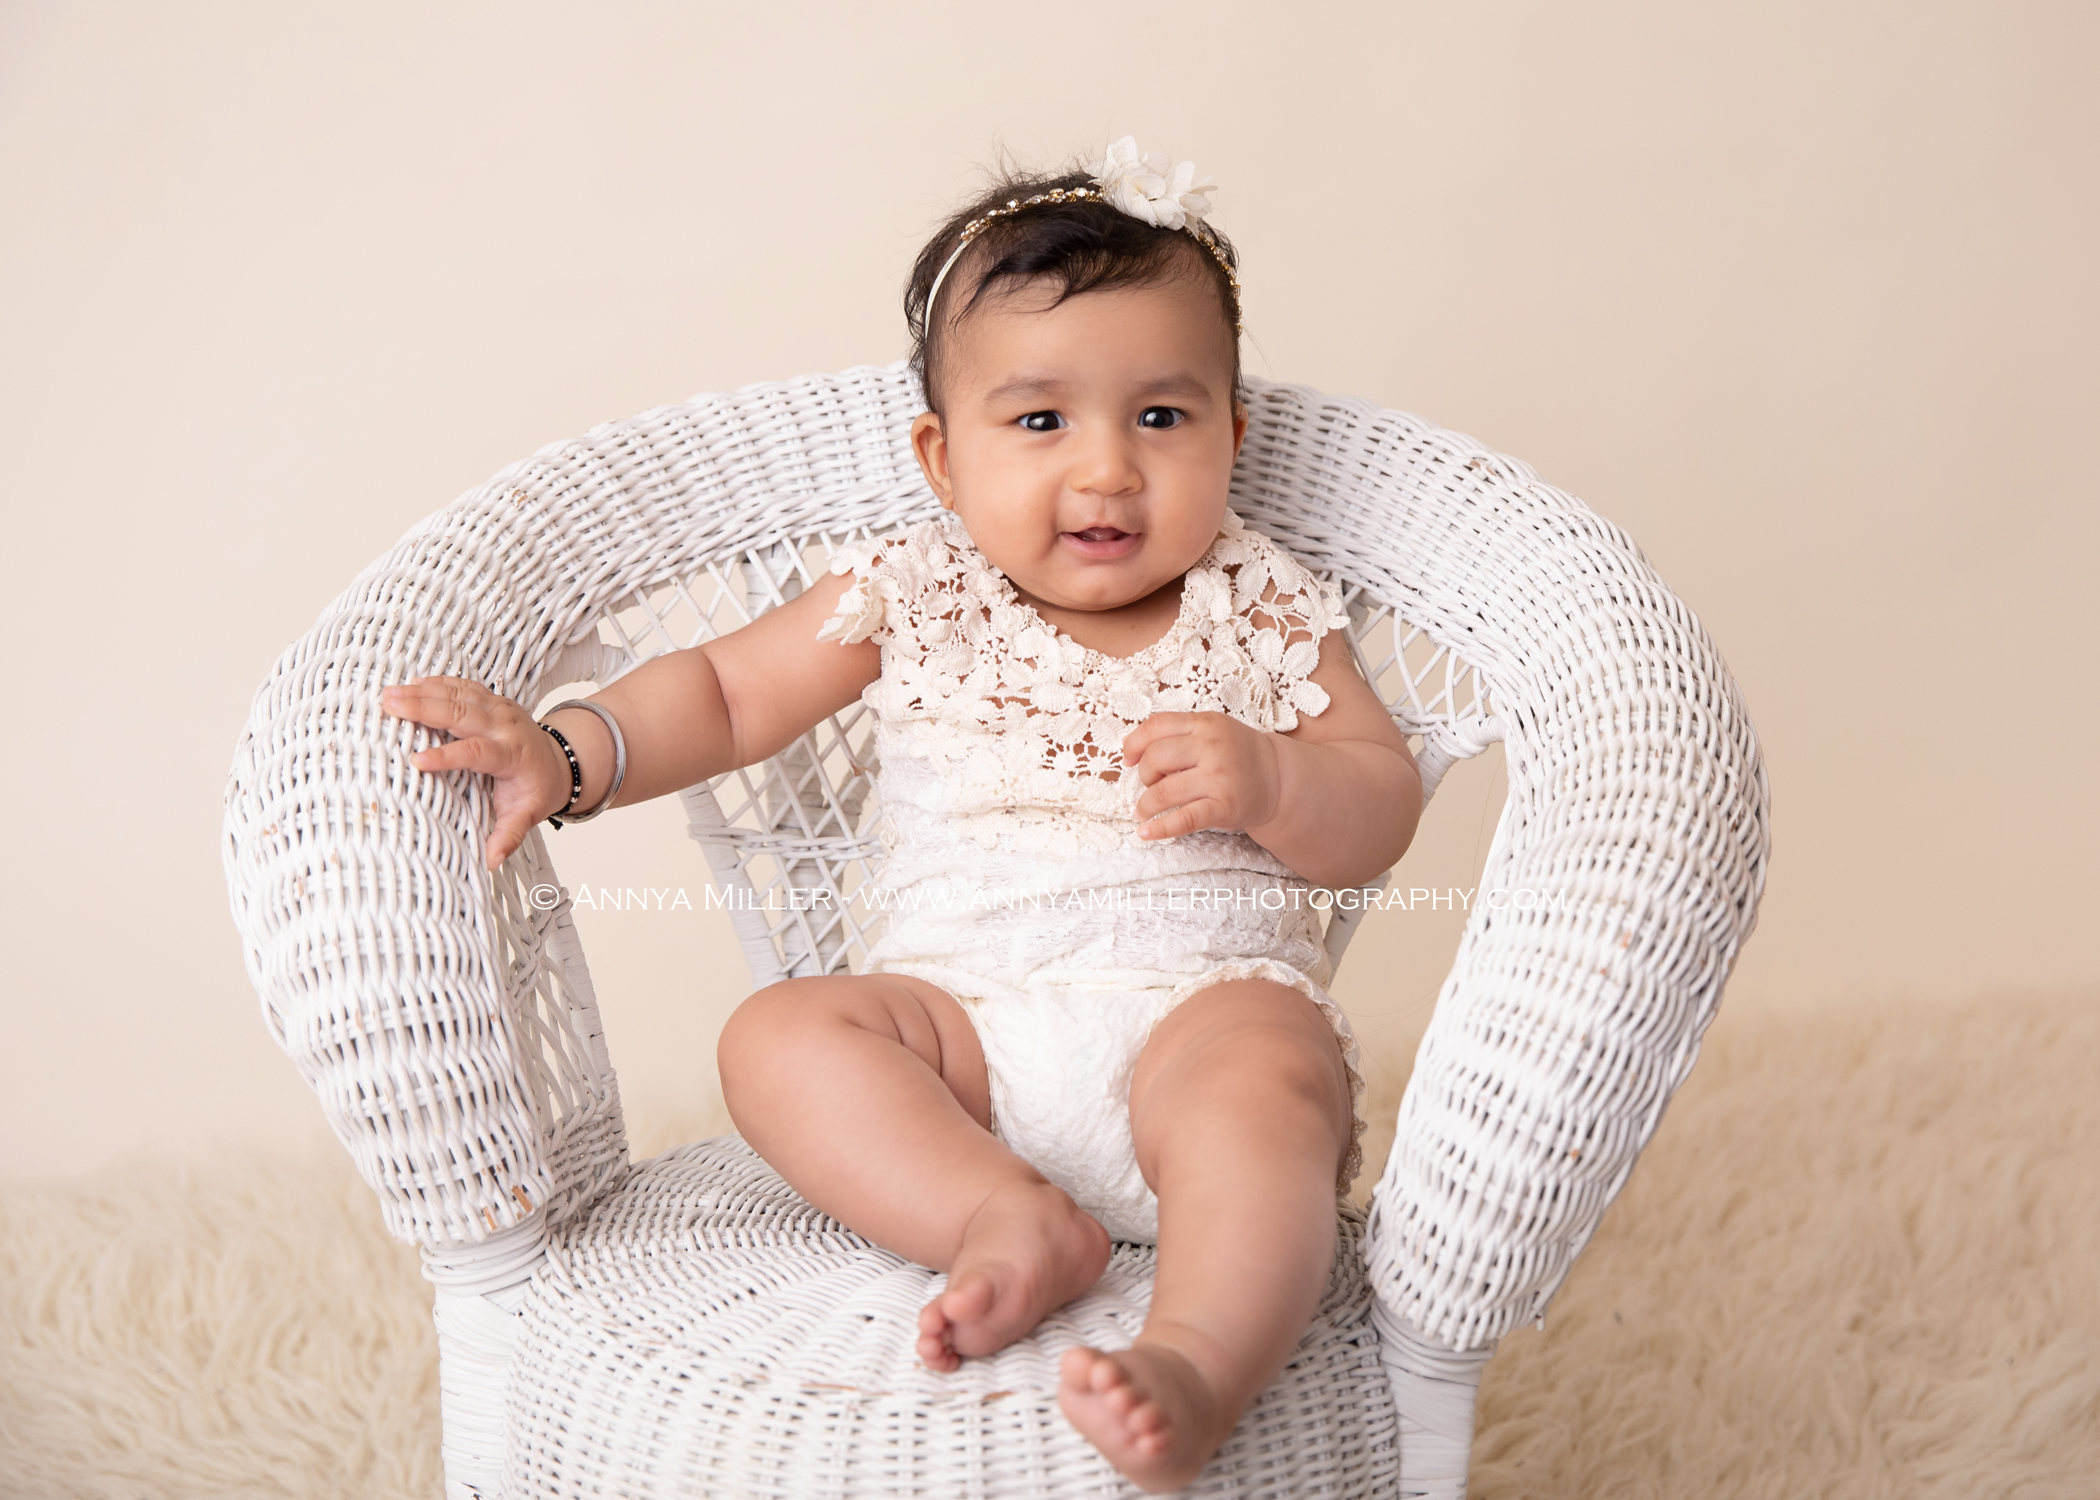 Portraits of baby girl and family by Pickering family photographer Annya Miller